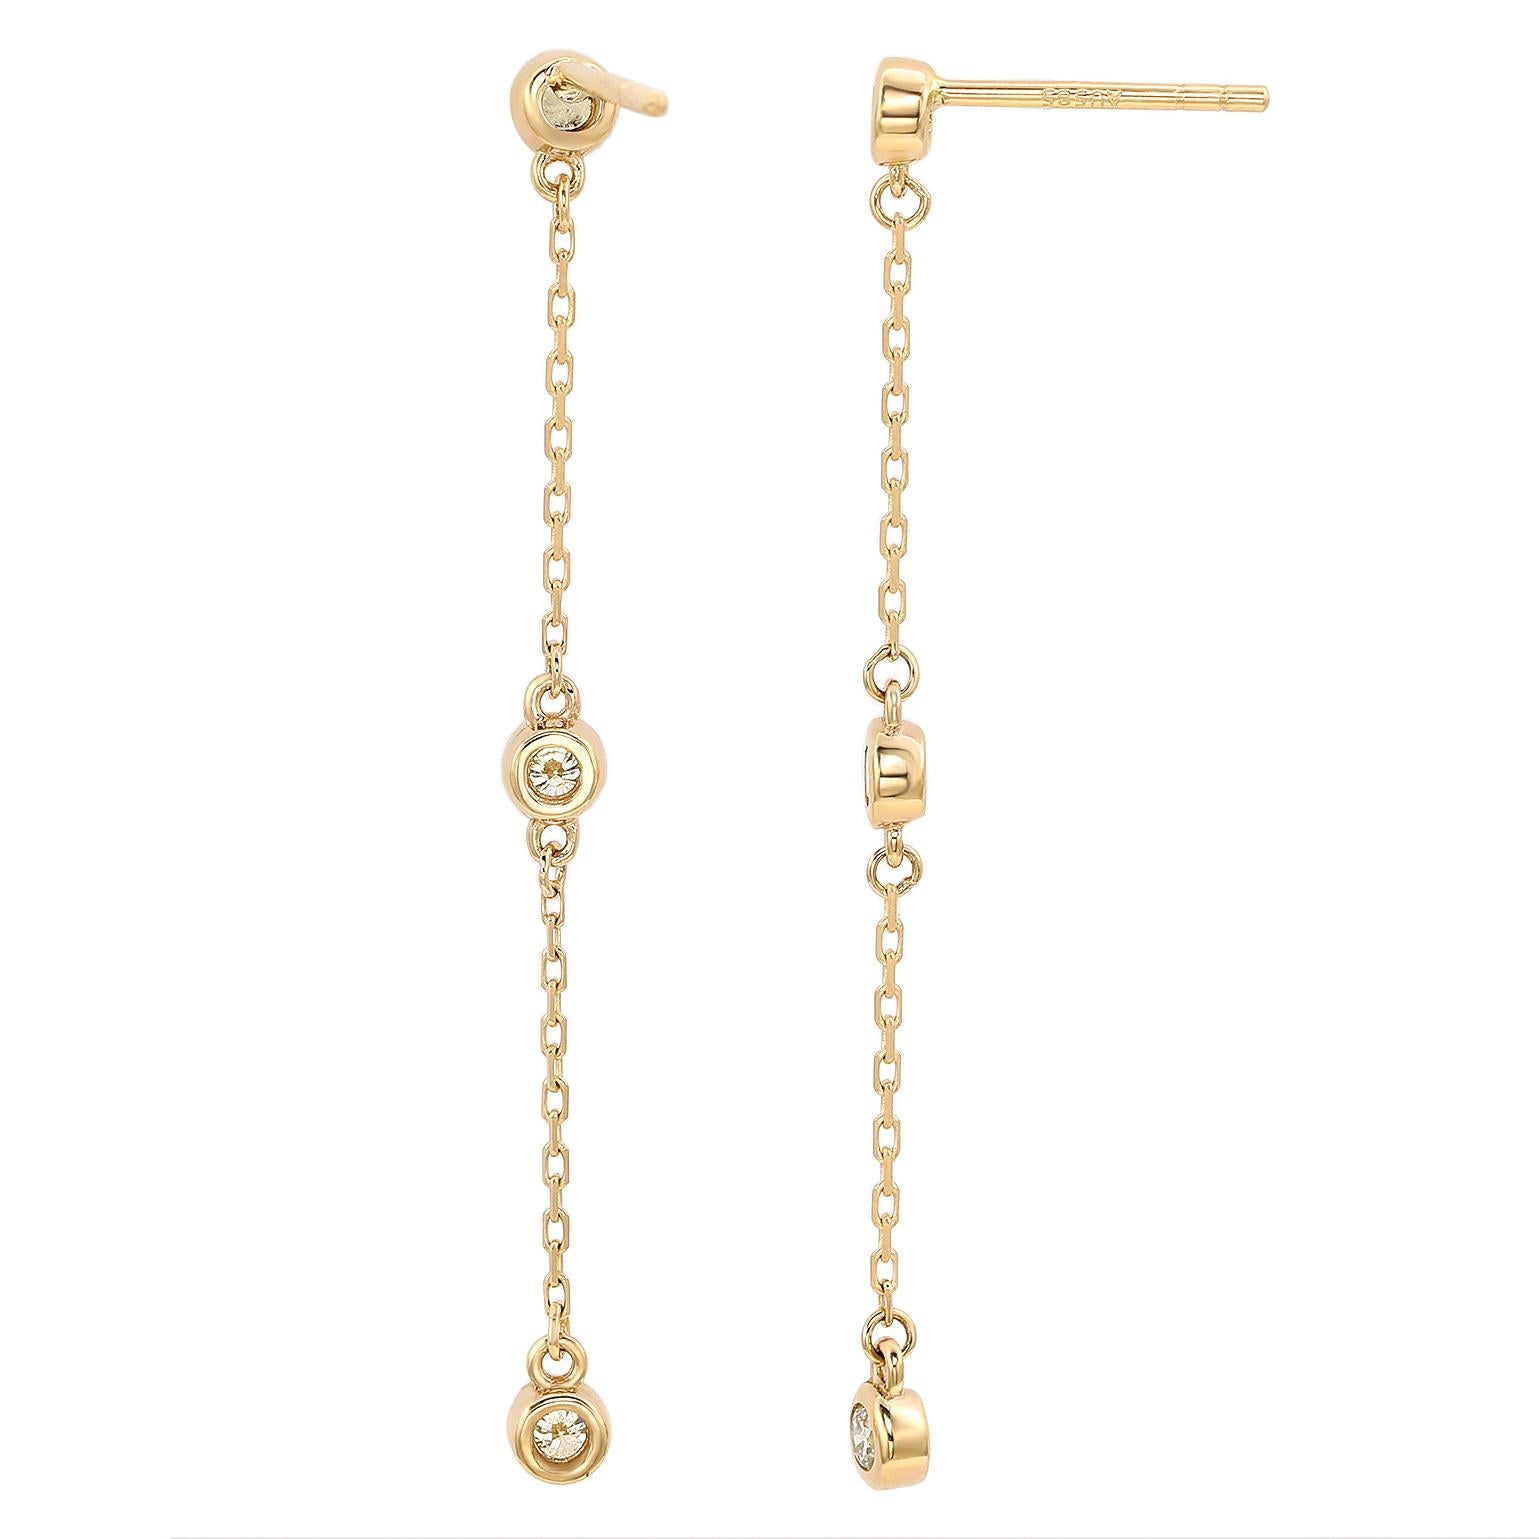 A touch of dazzle and a lot of style, these dangle earrings add a fashionable touch to any attire. Sleek and polished in solid yellow gold, these stylish earrings showcase a station design of bezel set 6 round cut white diamonds totaling 4/5 CTTW.